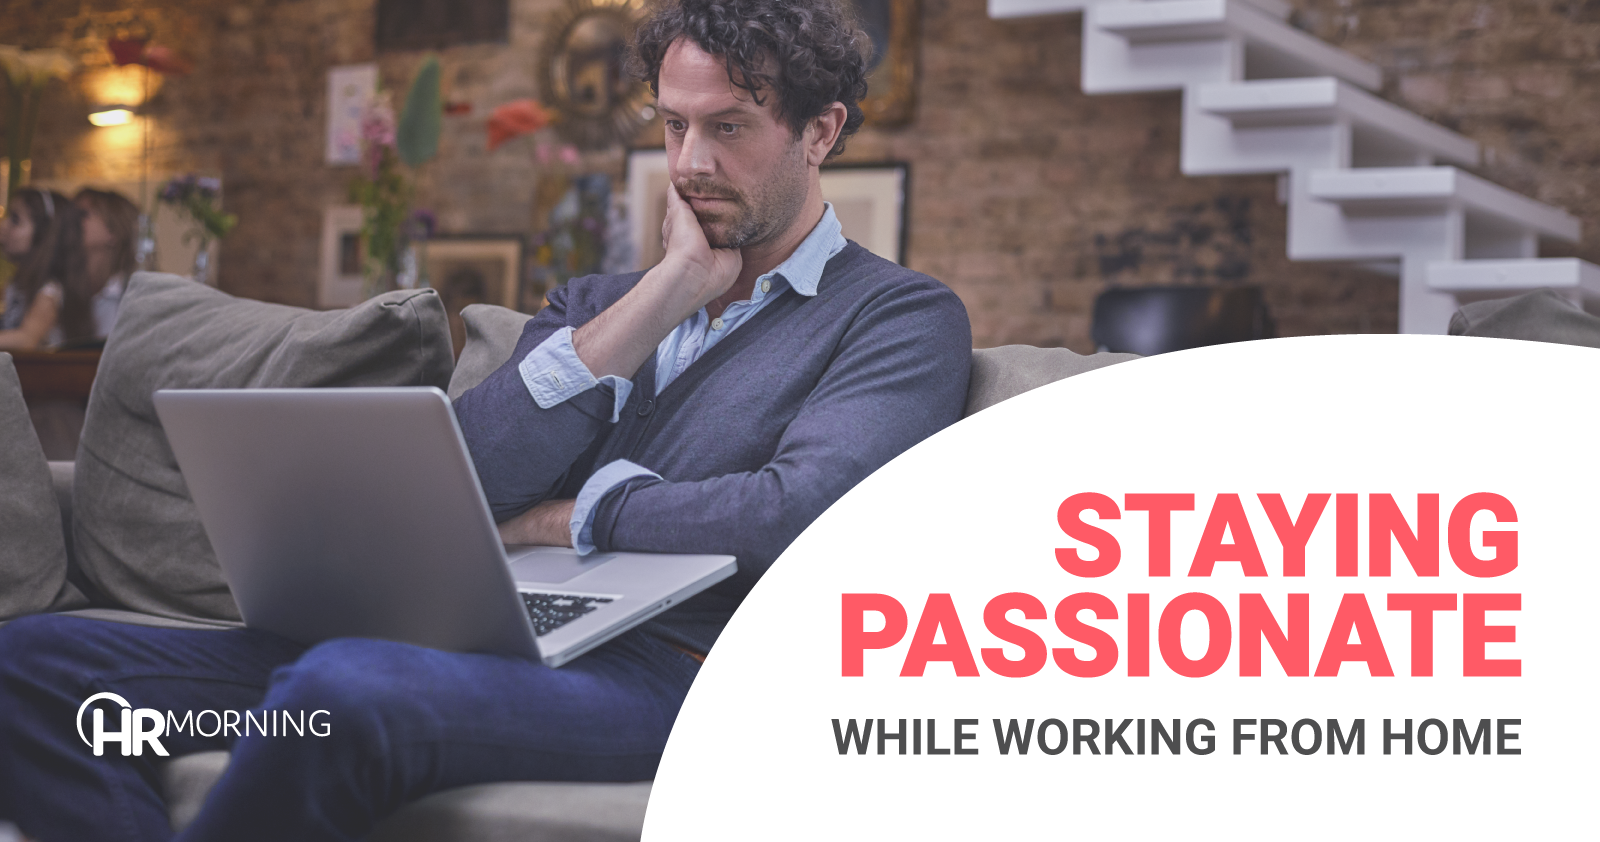 Staying Passionate while working from home